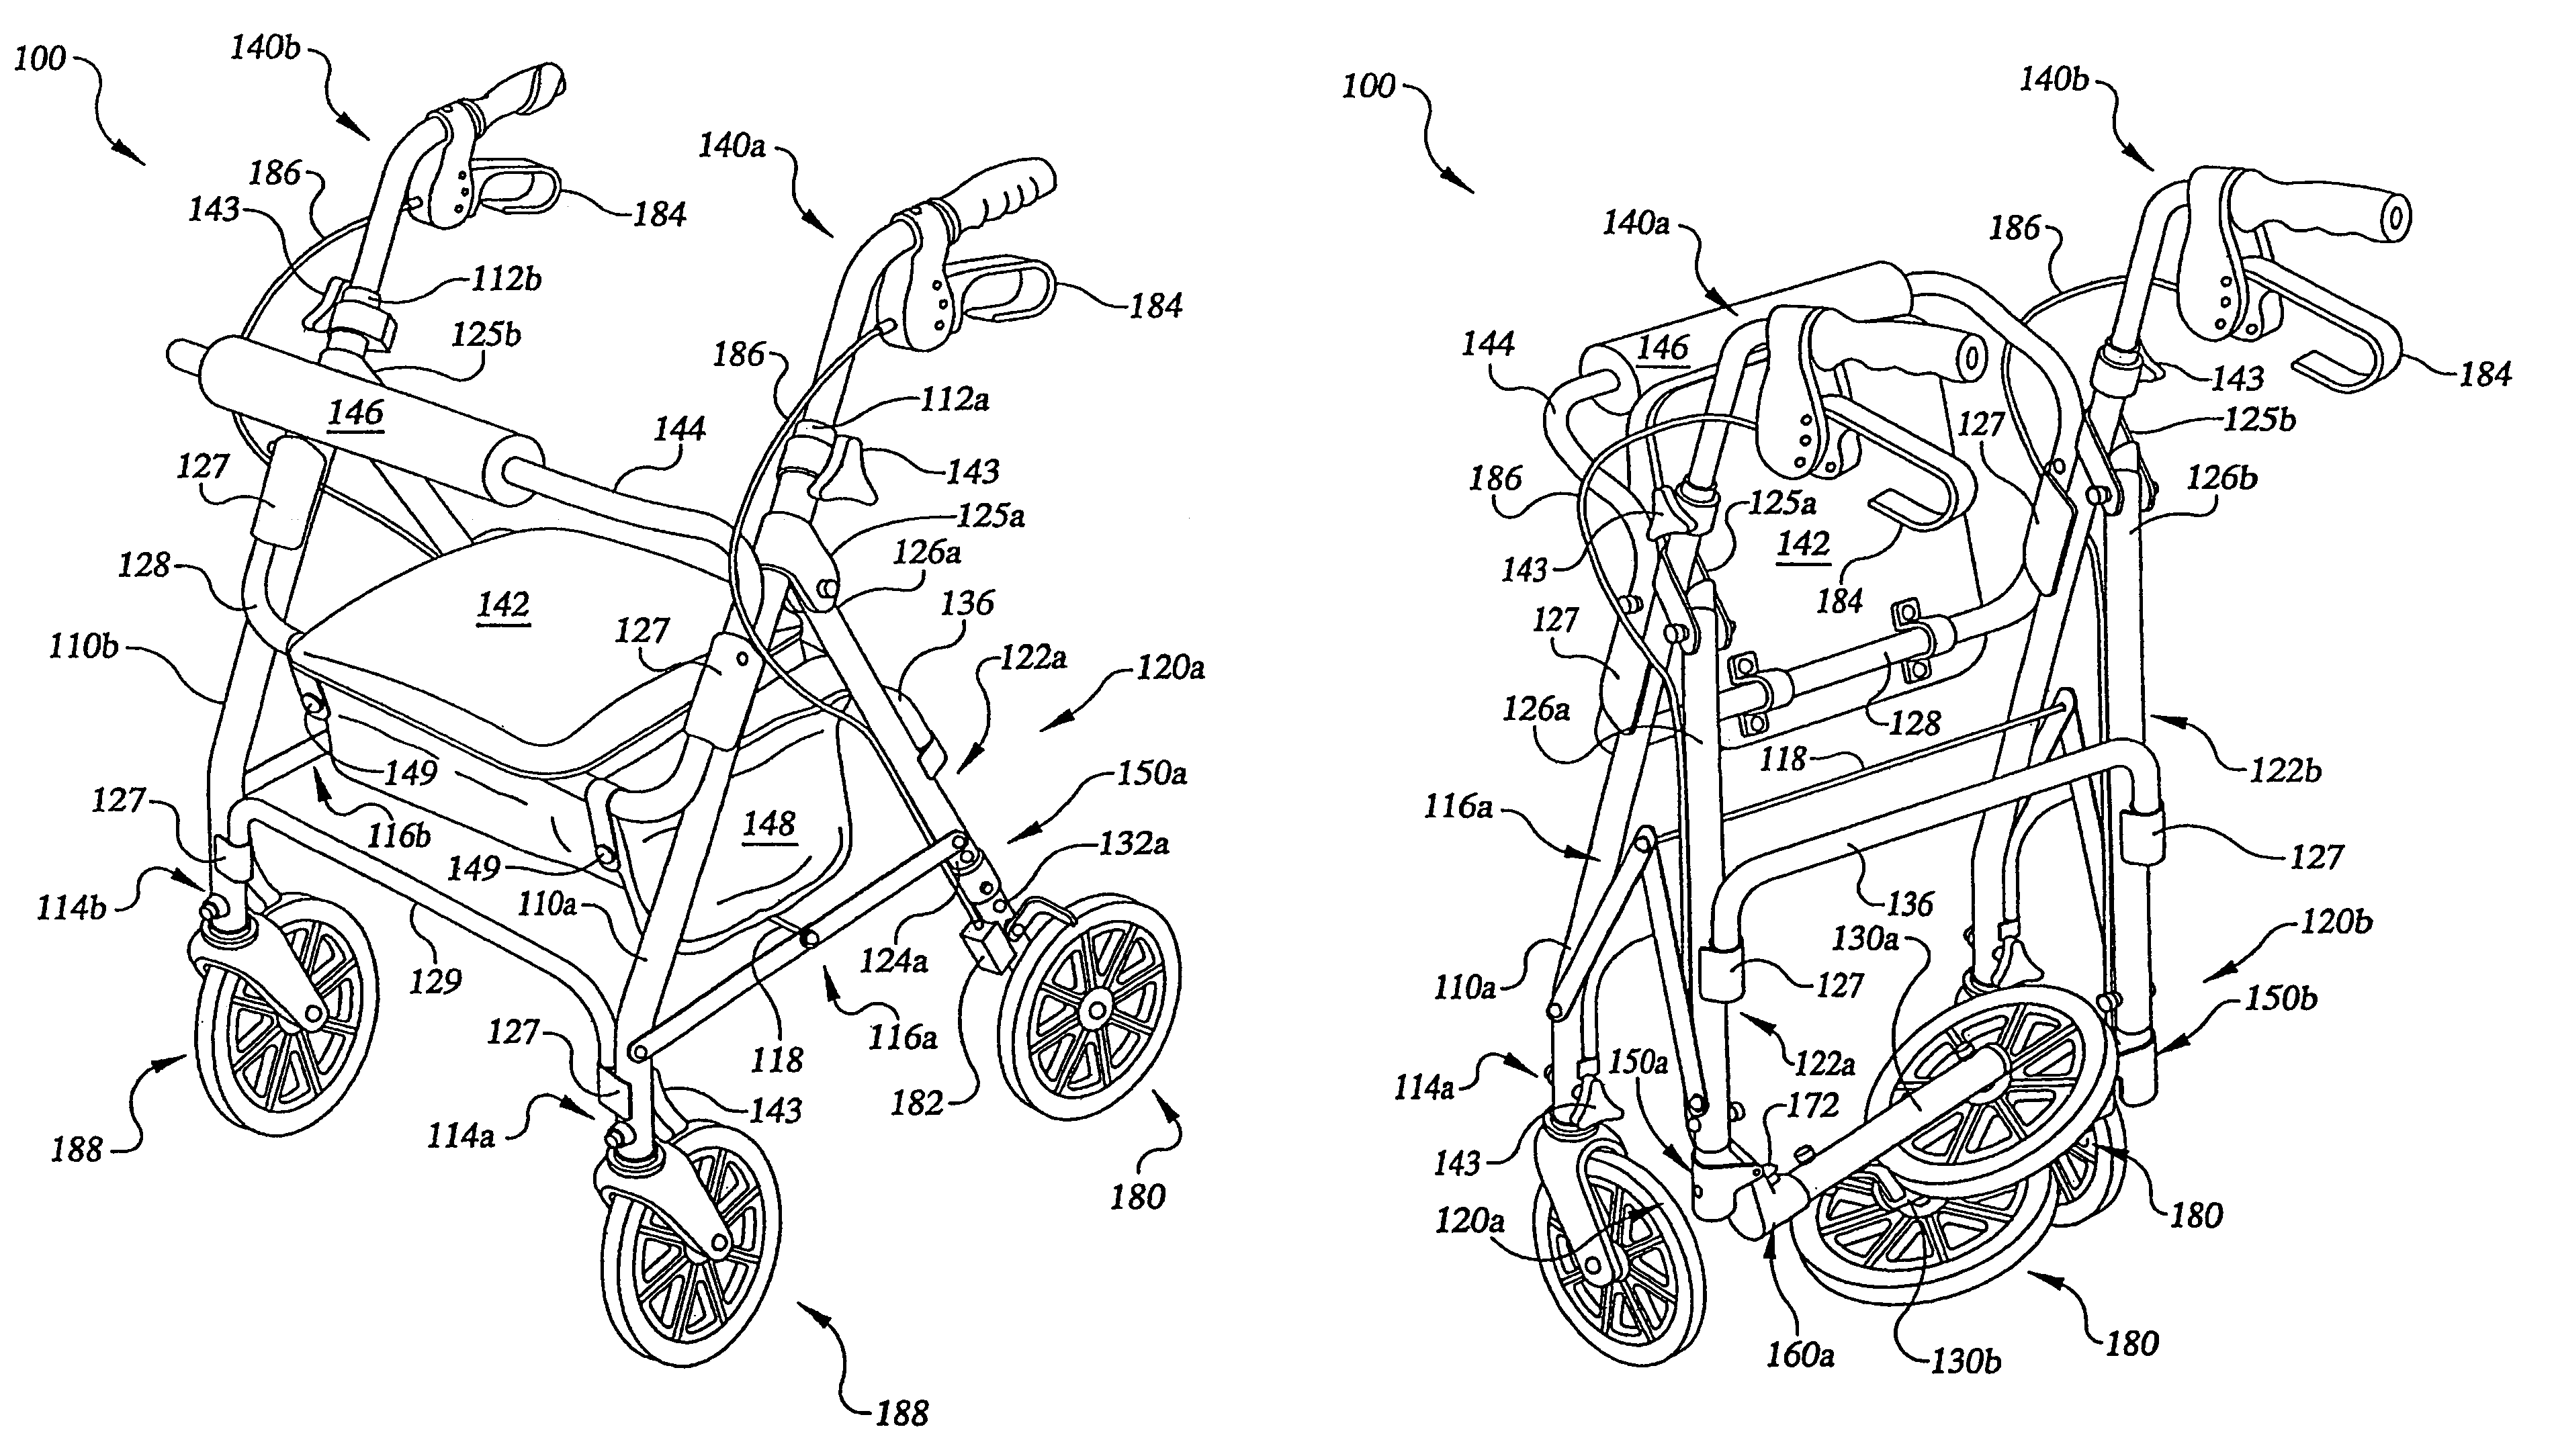 Foldable mobility support device